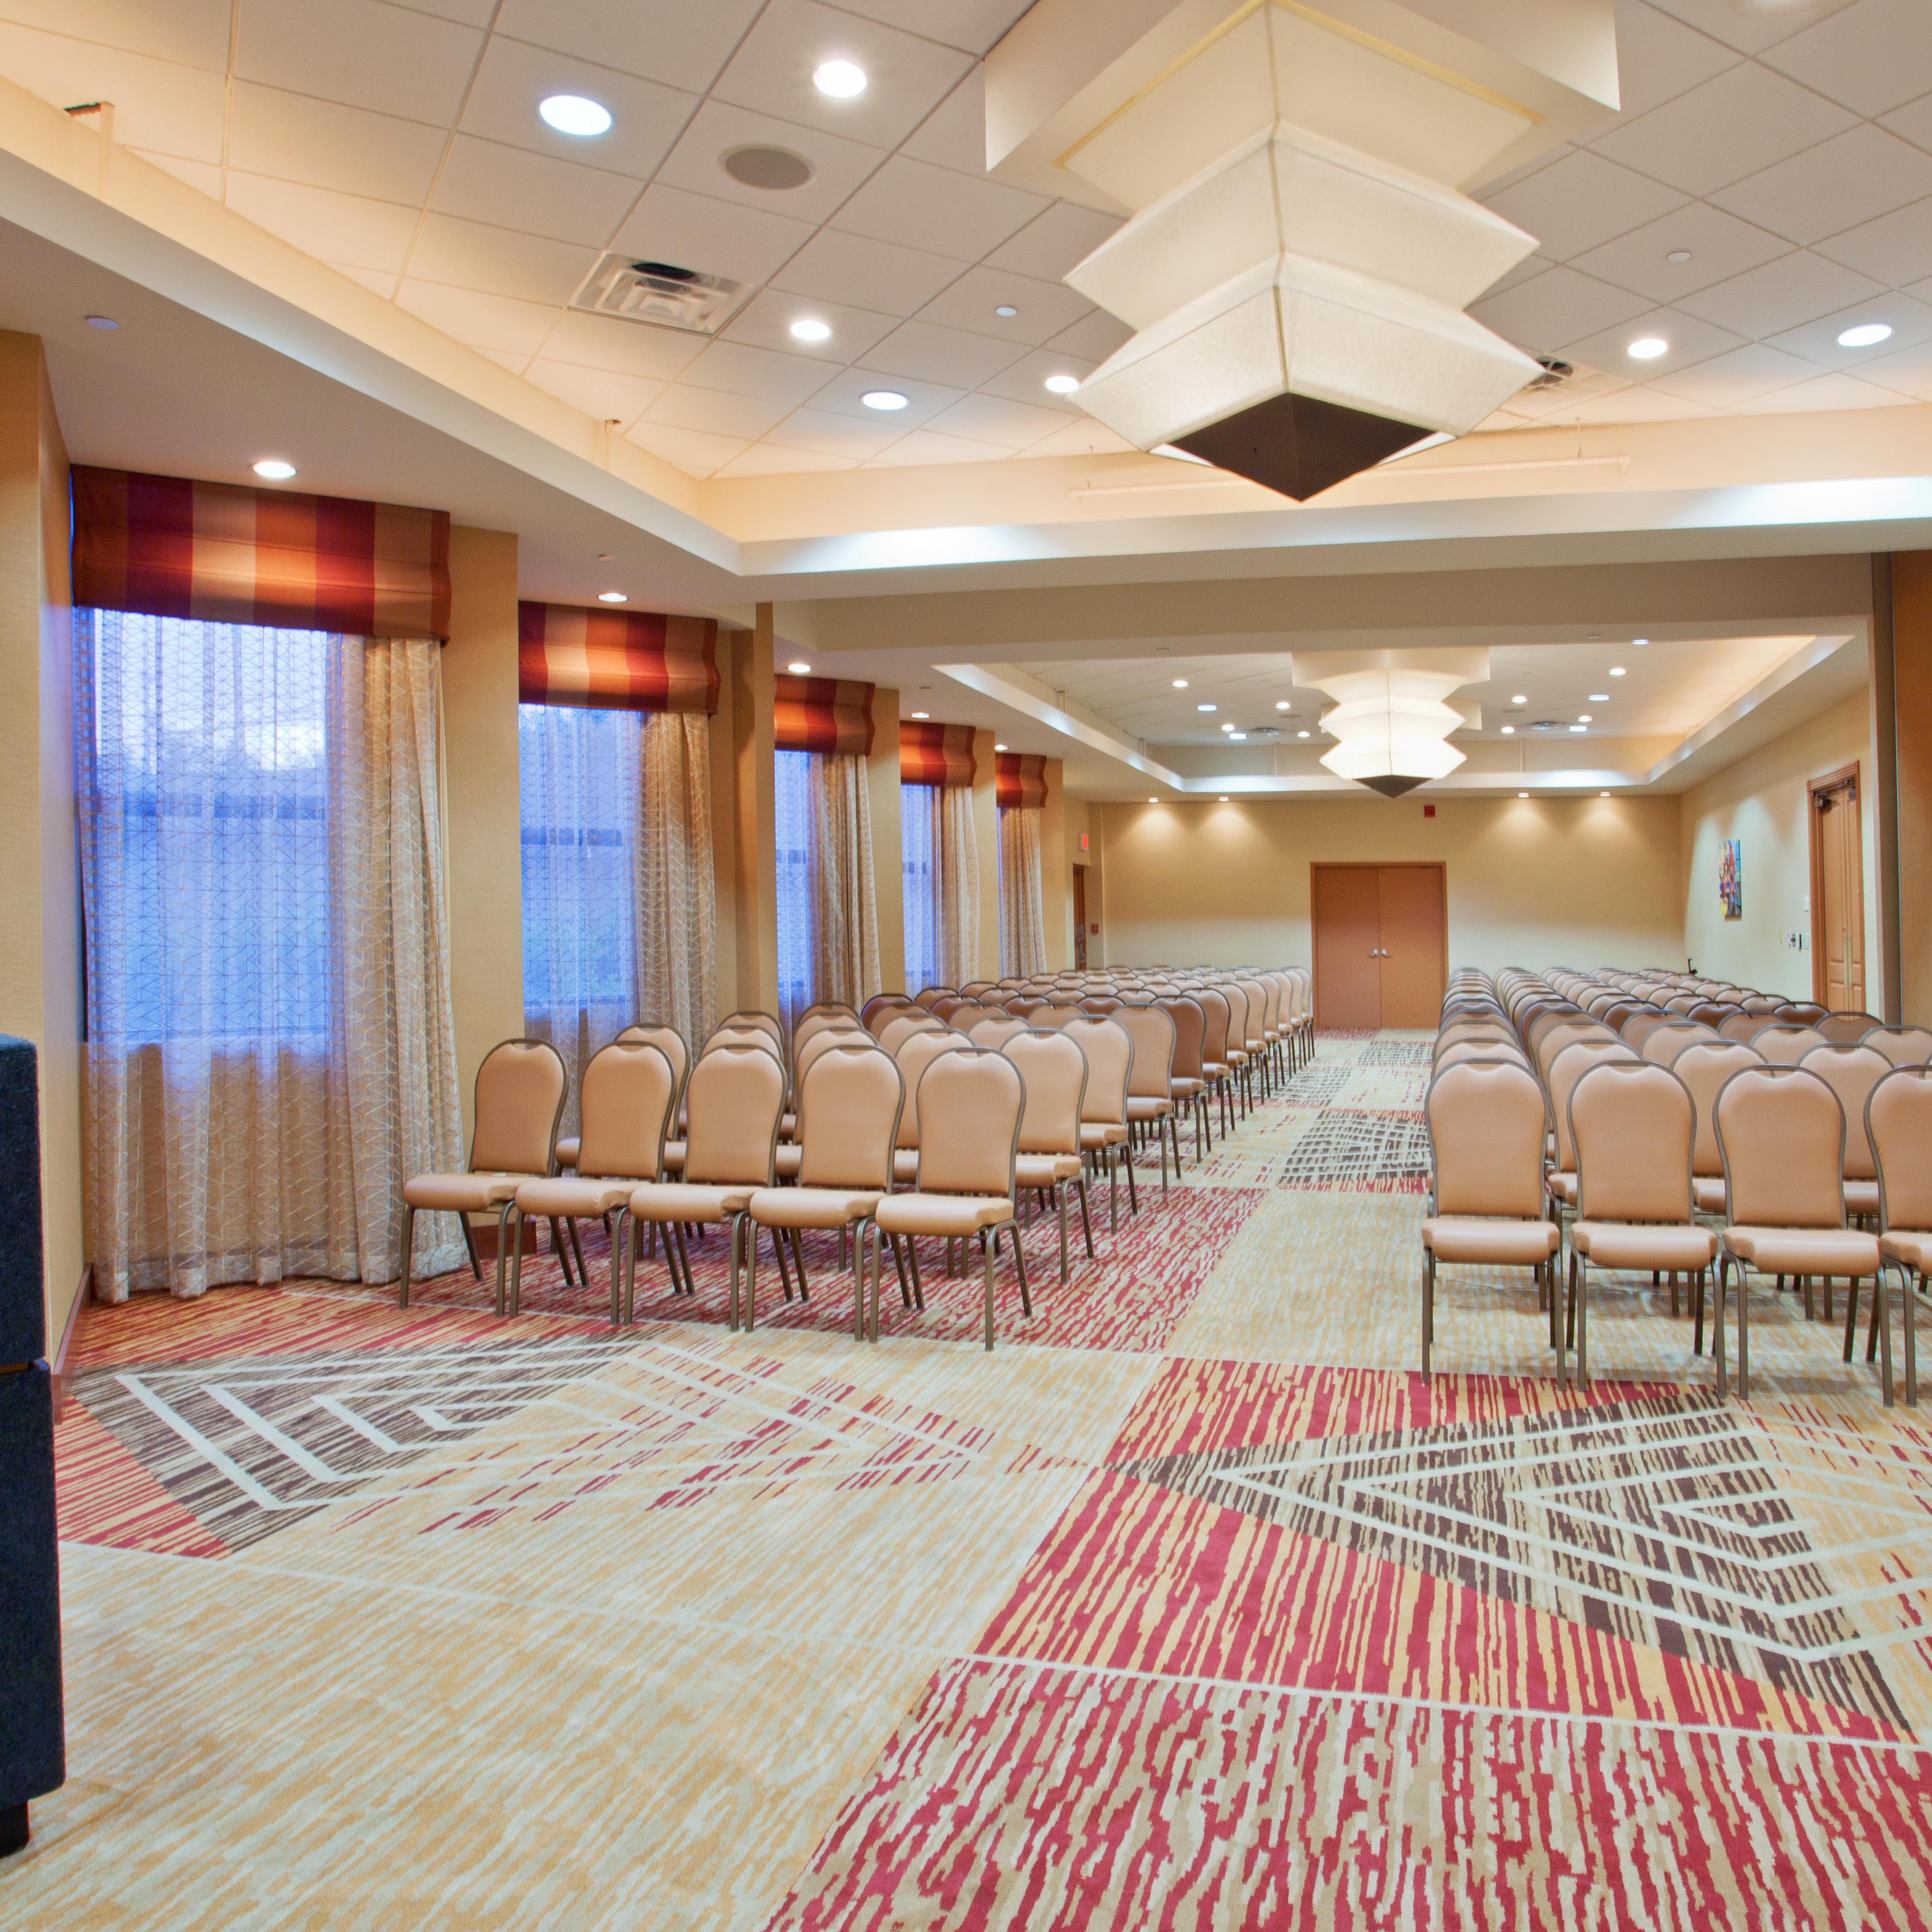 Our Houston meeting room features natural light and high ceilings.